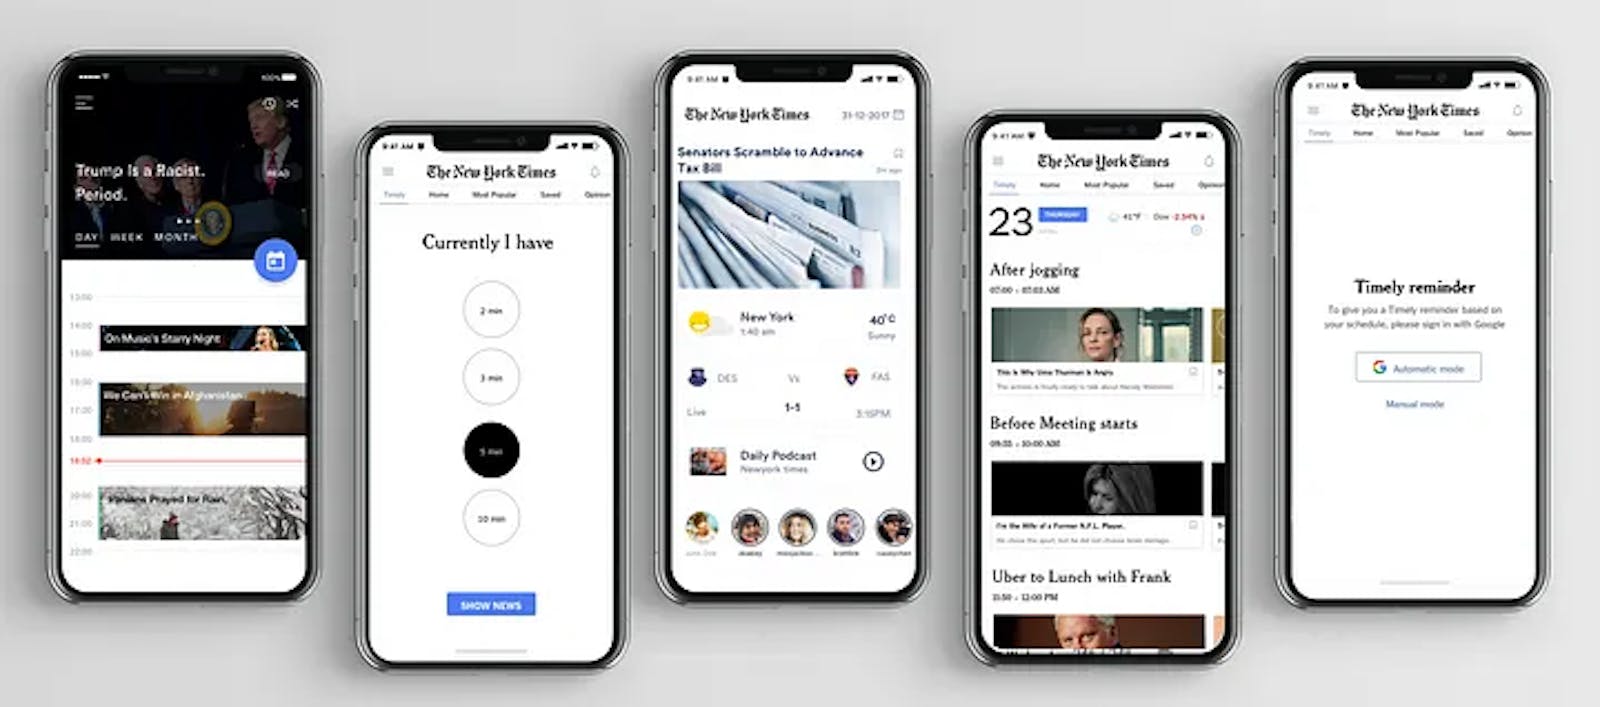 A Fresh Look at News Consumption: The New York Times App UX Redesign